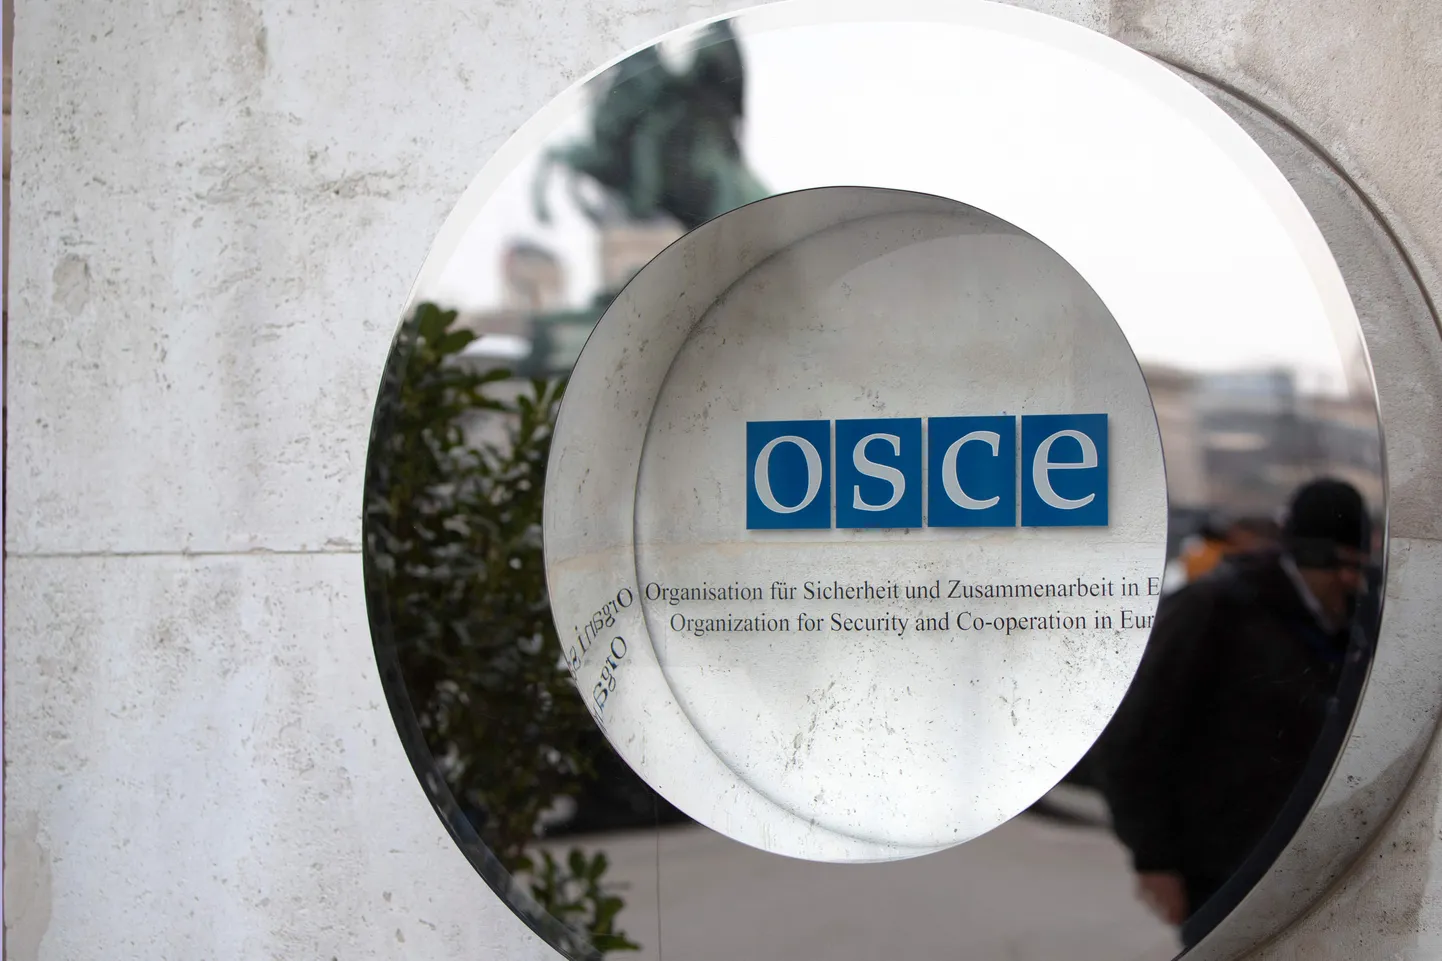 Russia committed to destroying normal functioning of OSCE.